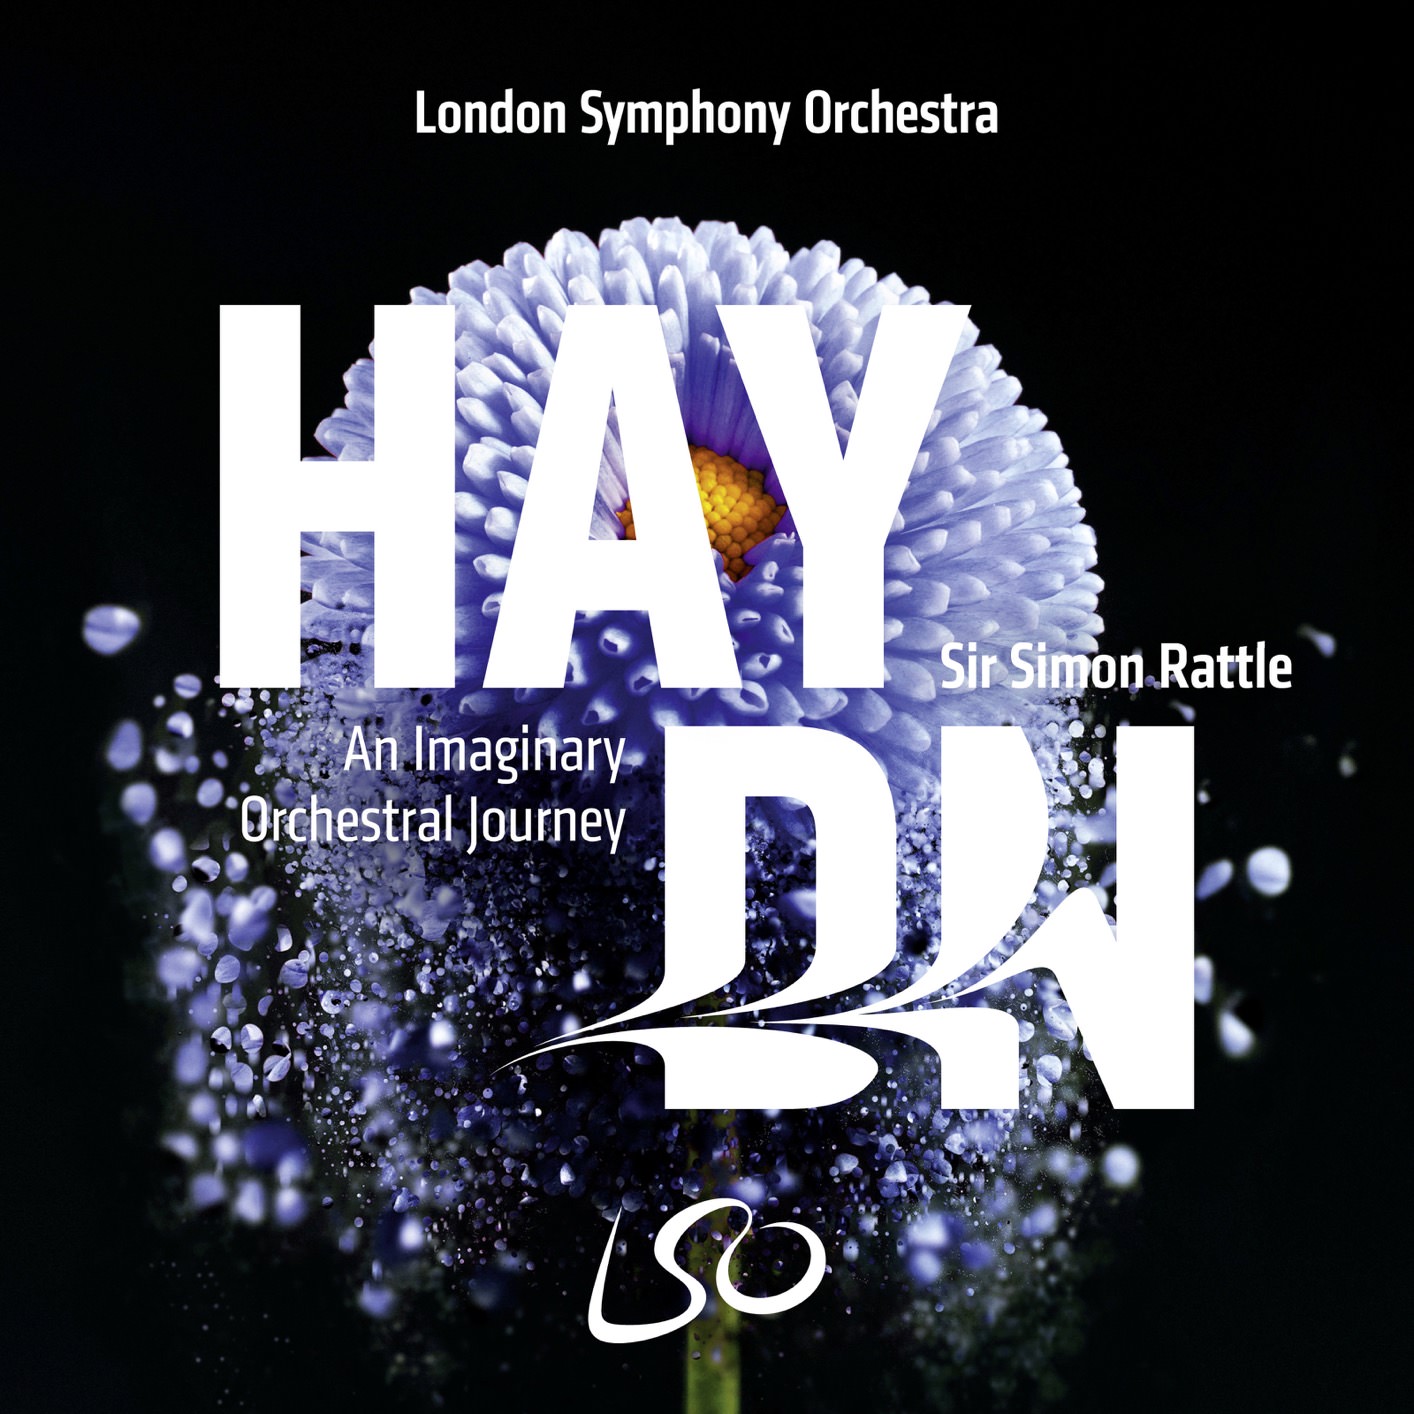 Sir Simon Rattle & London Symphony Orchestra – Haydn: An Imaginary Orchestral Journey (2018) [FLAC 24bit/192kHz]